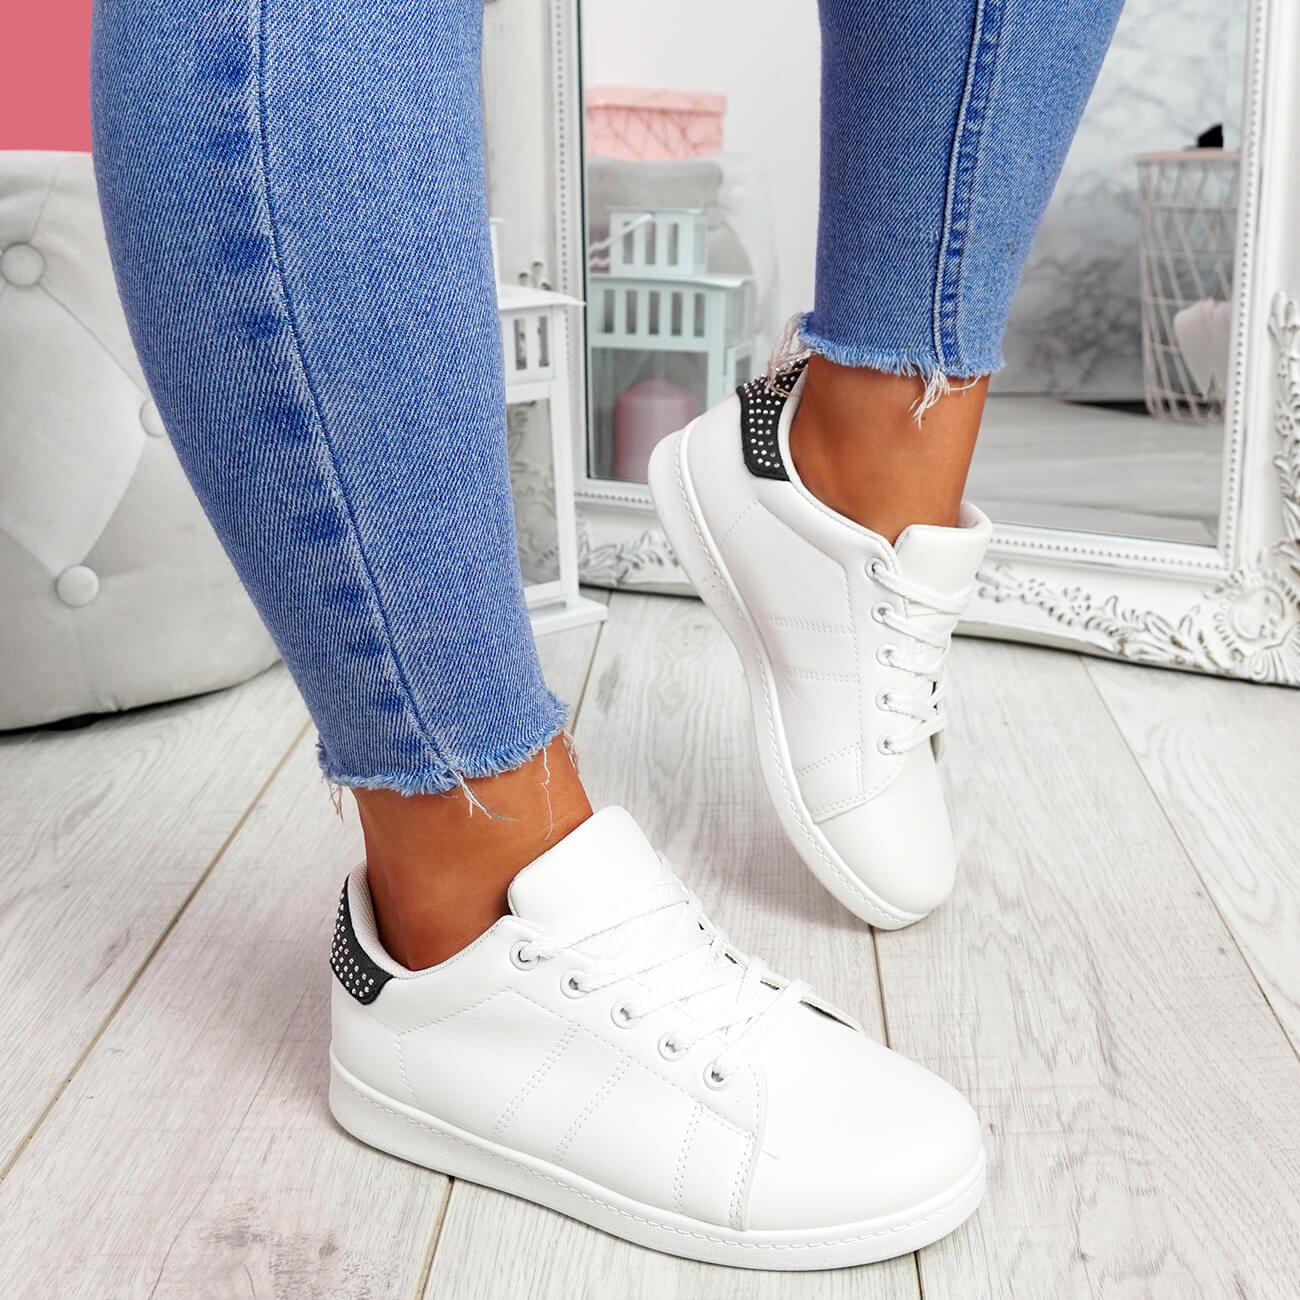 WOMENS LADIES FLATFORM SNEAKERS STUDDED LACE UP TRAINERS CASUAL PARTY SHOES SIZE 